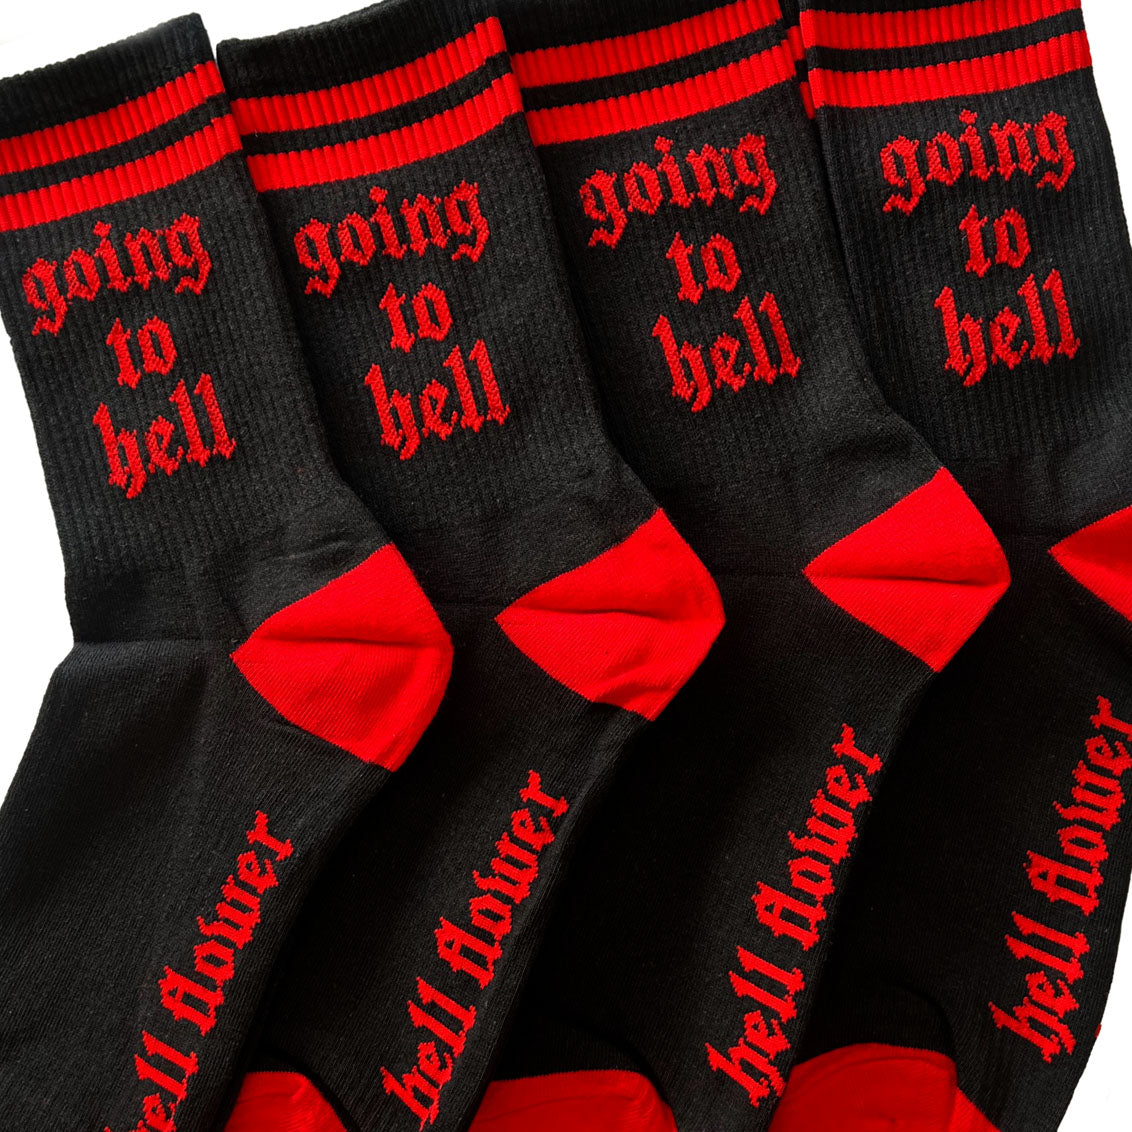 Going To Hell socks black/red